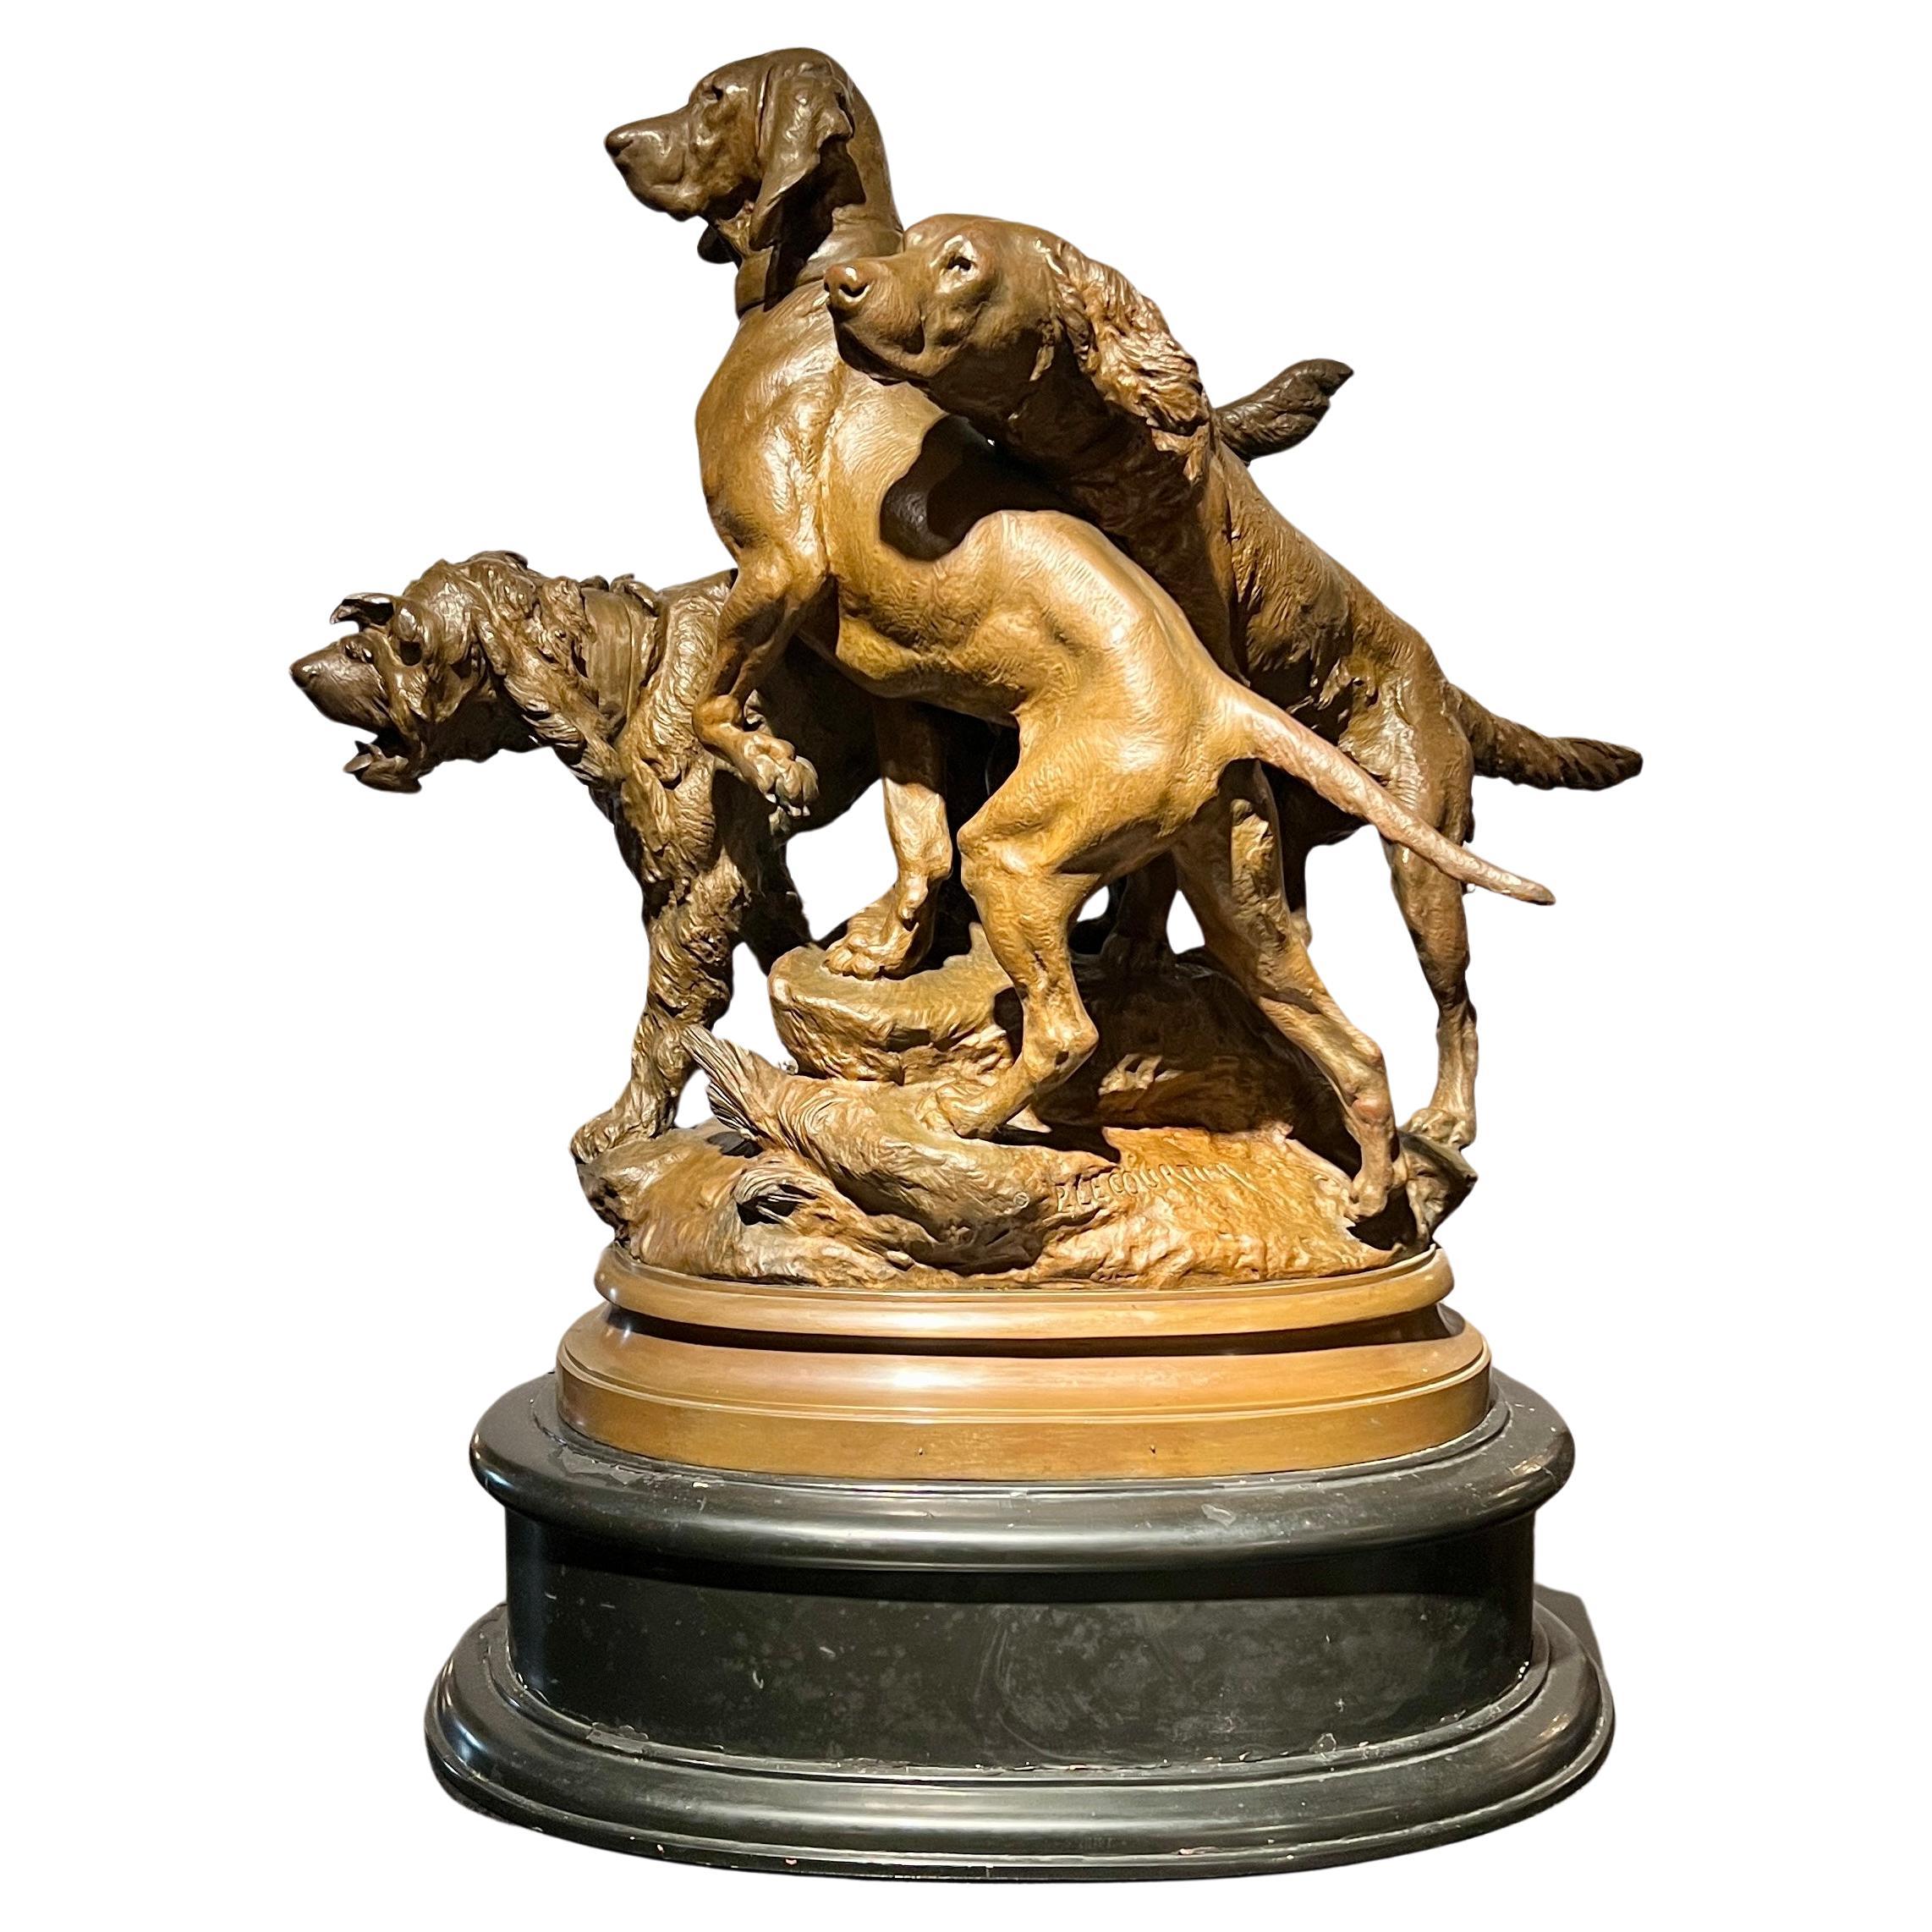 Antique French Bronze "Field Dogs" Sculpture by Prosper Lecourtier (1855-1924) For Sale